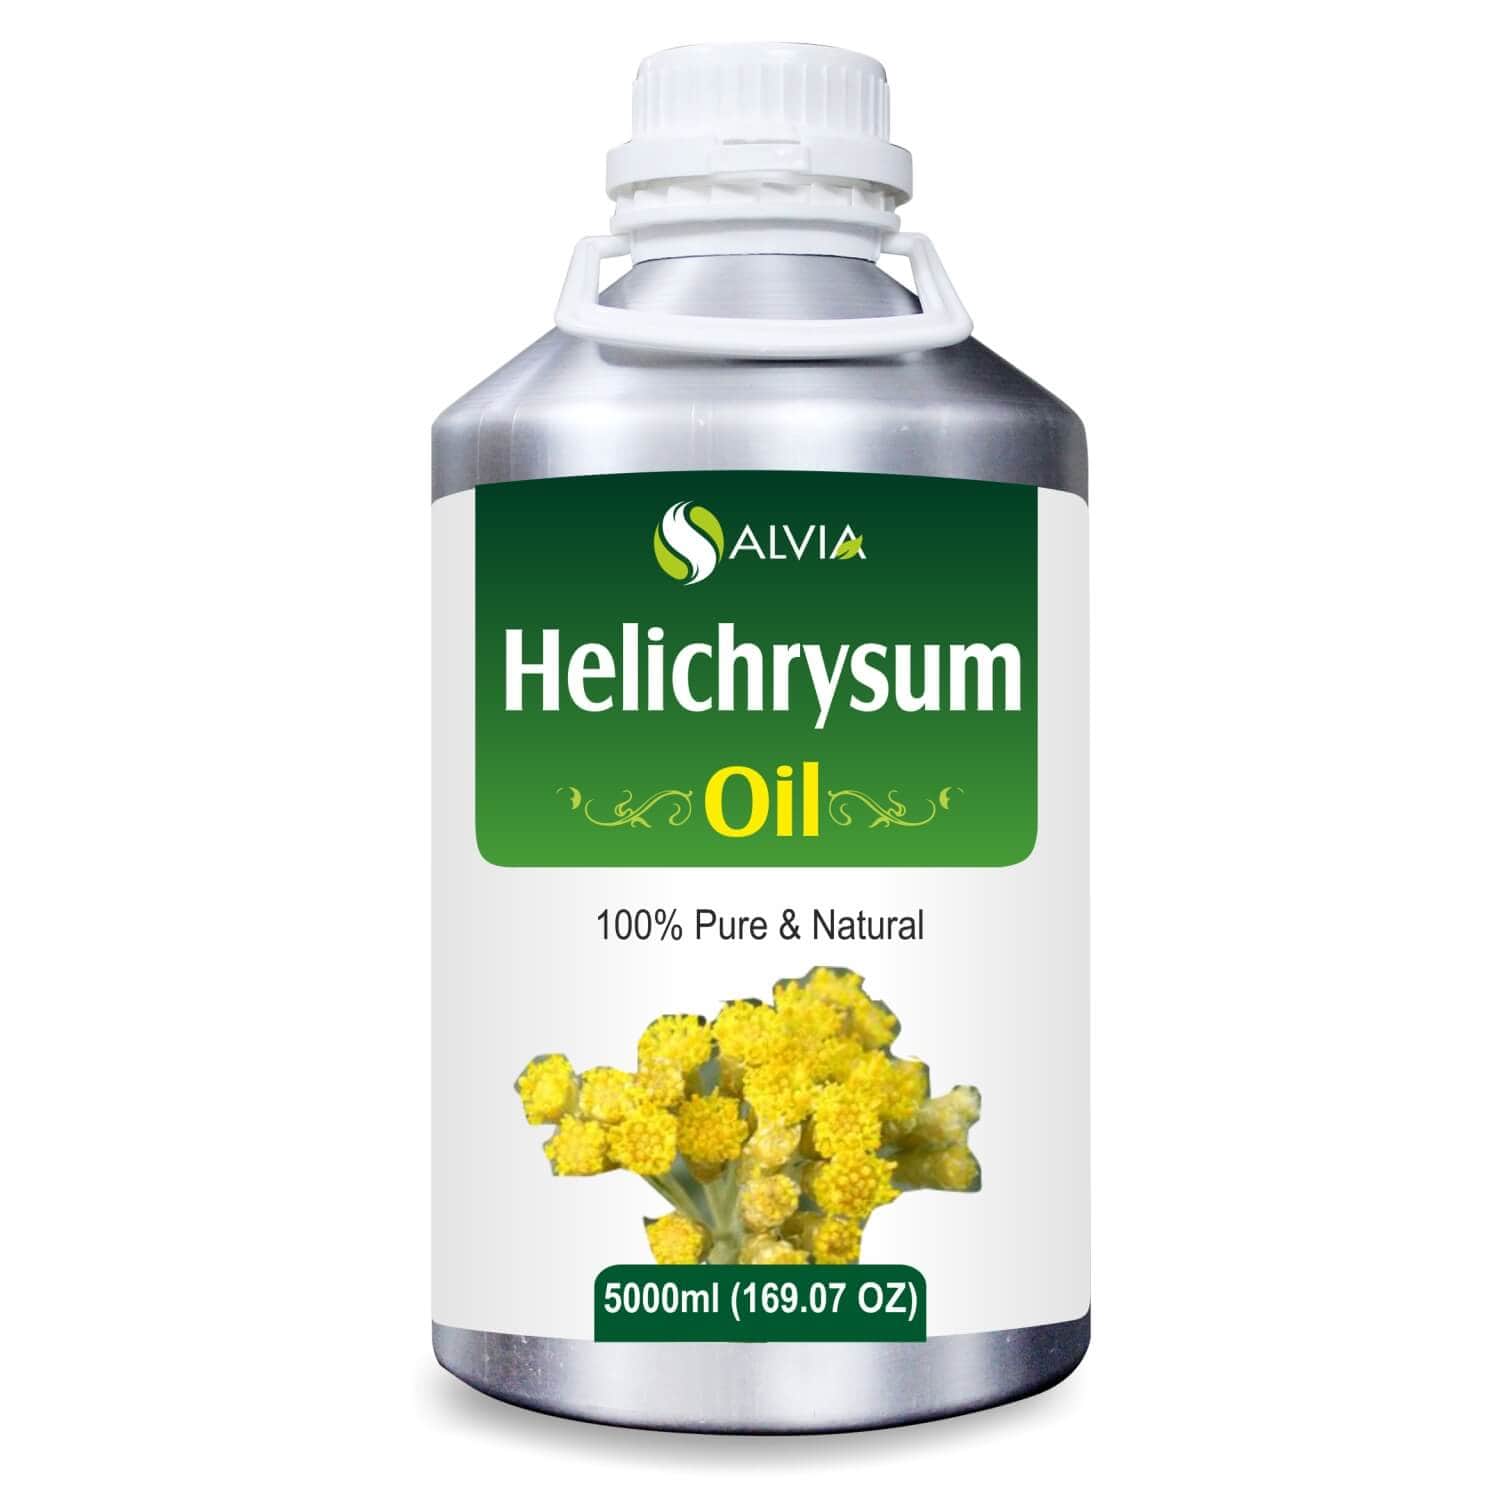 Salvia Natural Essential Oils,Best Essential Oils for Skin 5000ml Helichrysum Oil (Helichrysum Italicum) Natural and Pure Essential Oil Reduces Blemishes & Acne Scars, Promotes Healing, Fights Skin Infection, Anti-Inflammatory